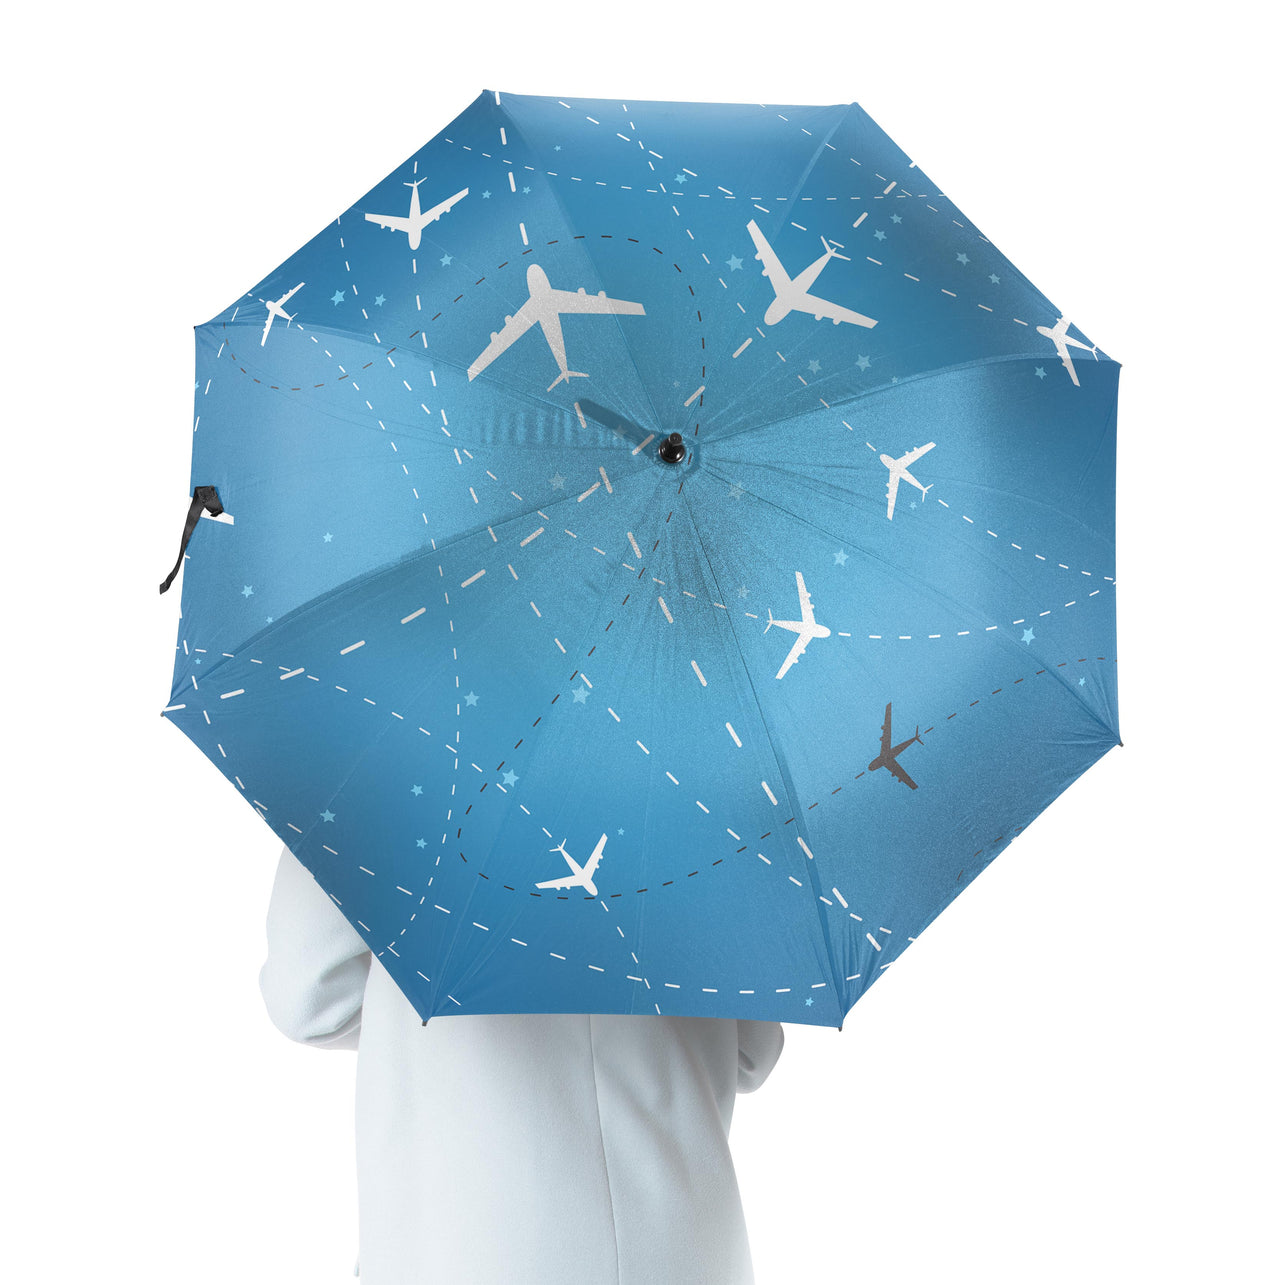 Travelling with Aircraft Designed Umbrella